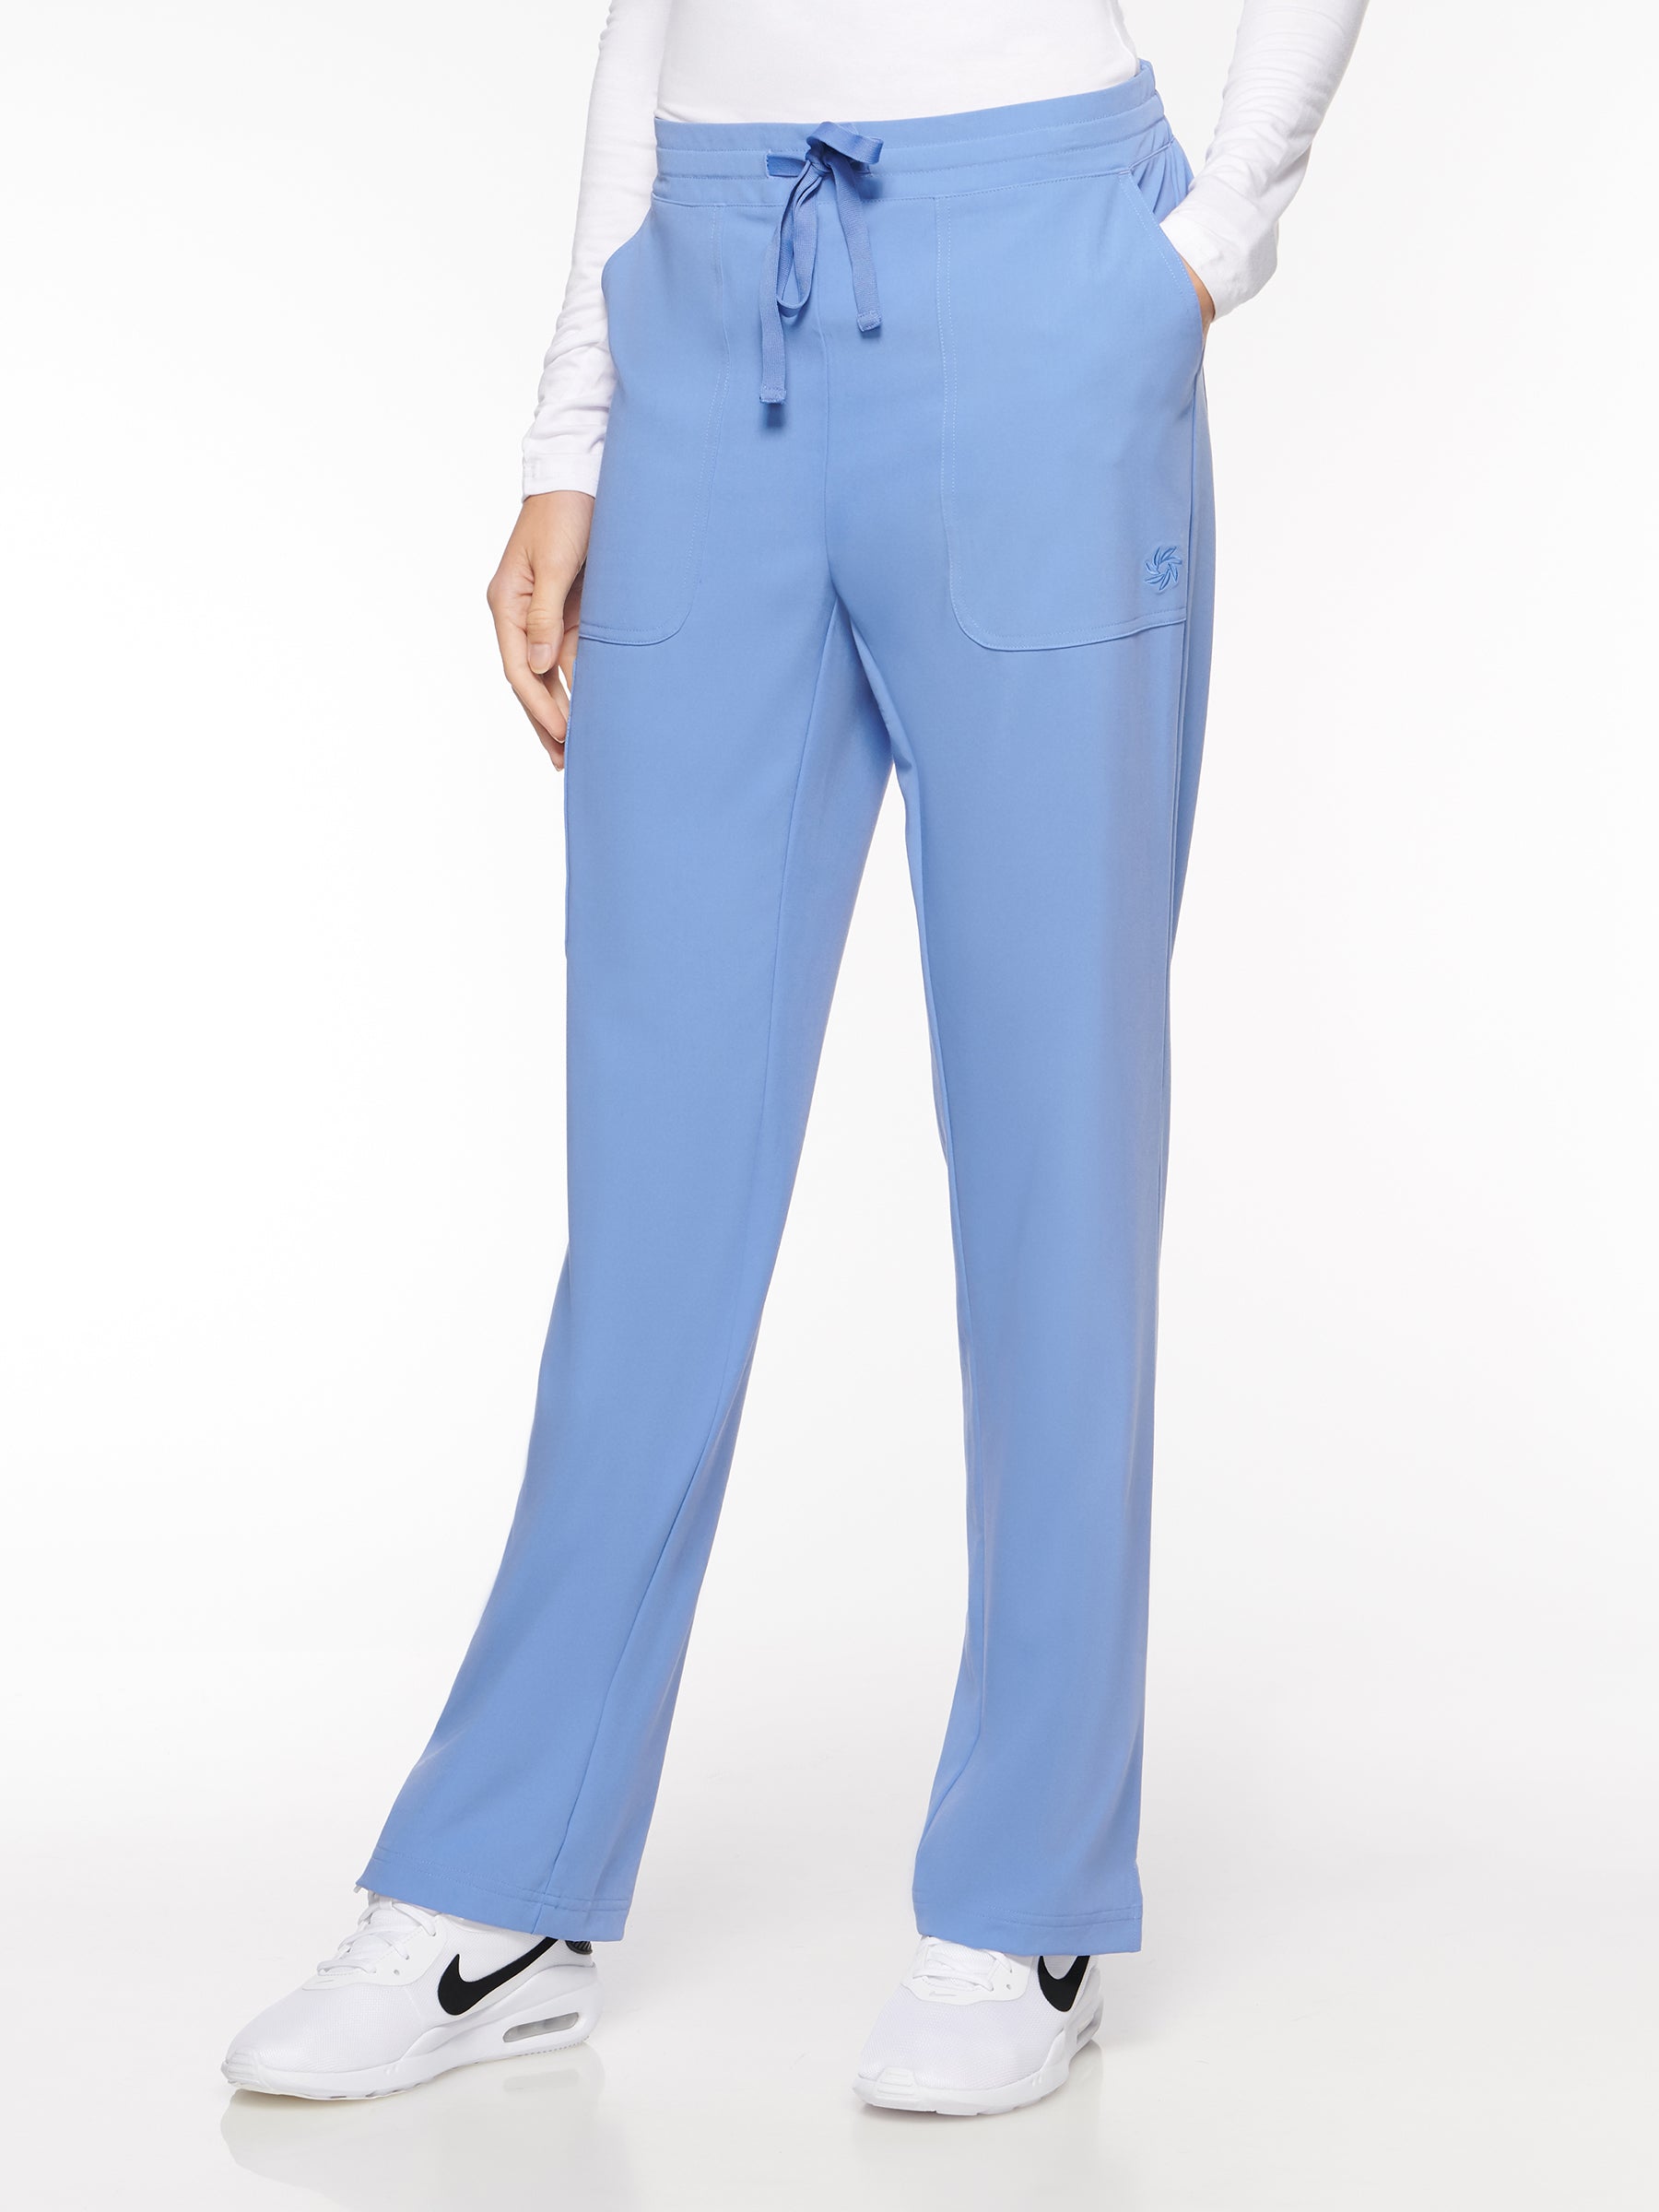 Womens Pant Classic Elastic Pant with 7 Pockets – Long (93001L) - A Plus Medical Scrubs